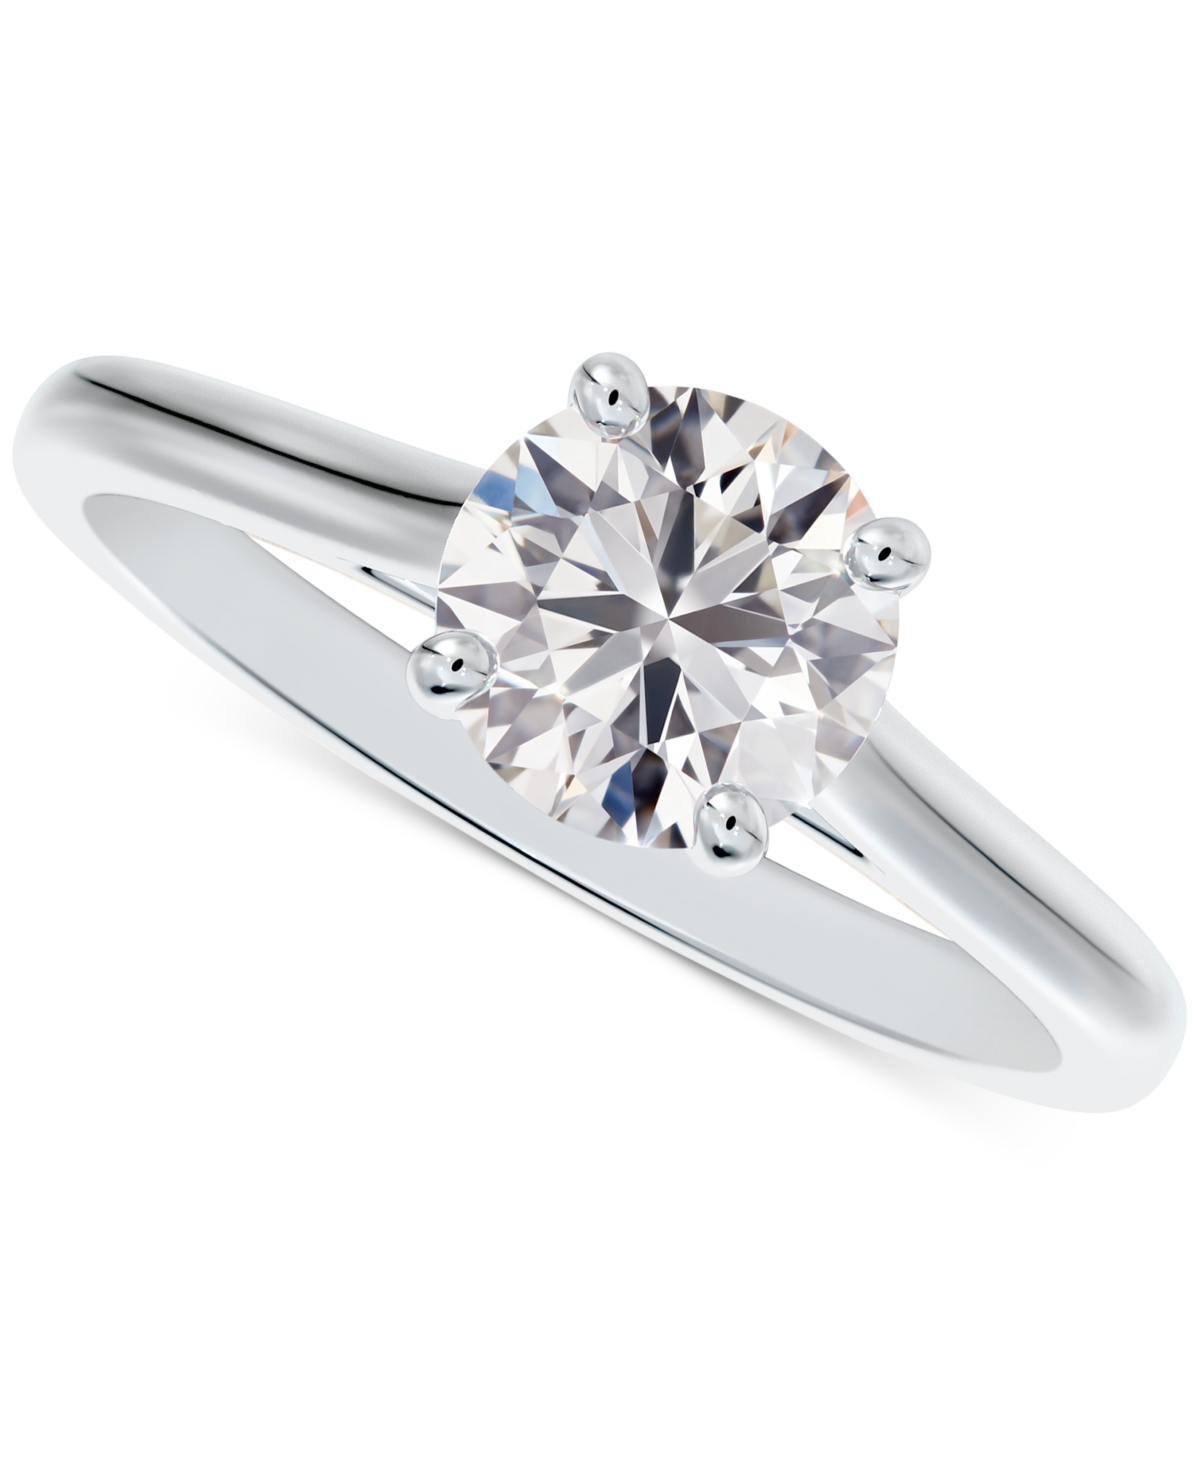 Portfolio by De Beers Forevermark Diamond Round-Cut Cathedral Solitaire Engagement Ring (1/2 ct. t.w.) - White Gold